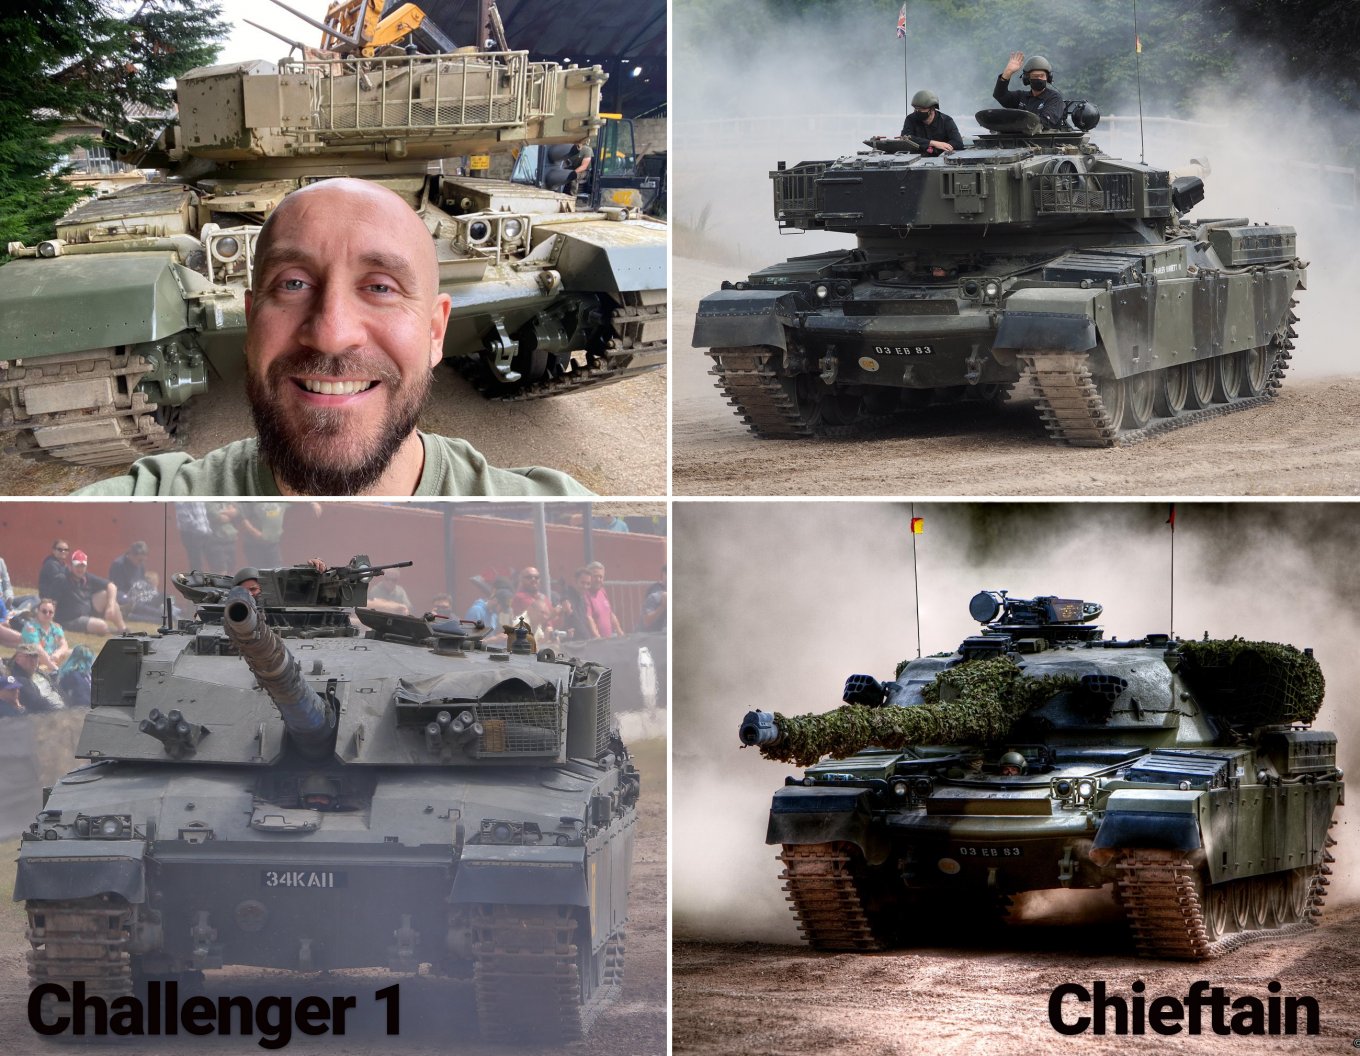 Challenger 1 and Chieftain